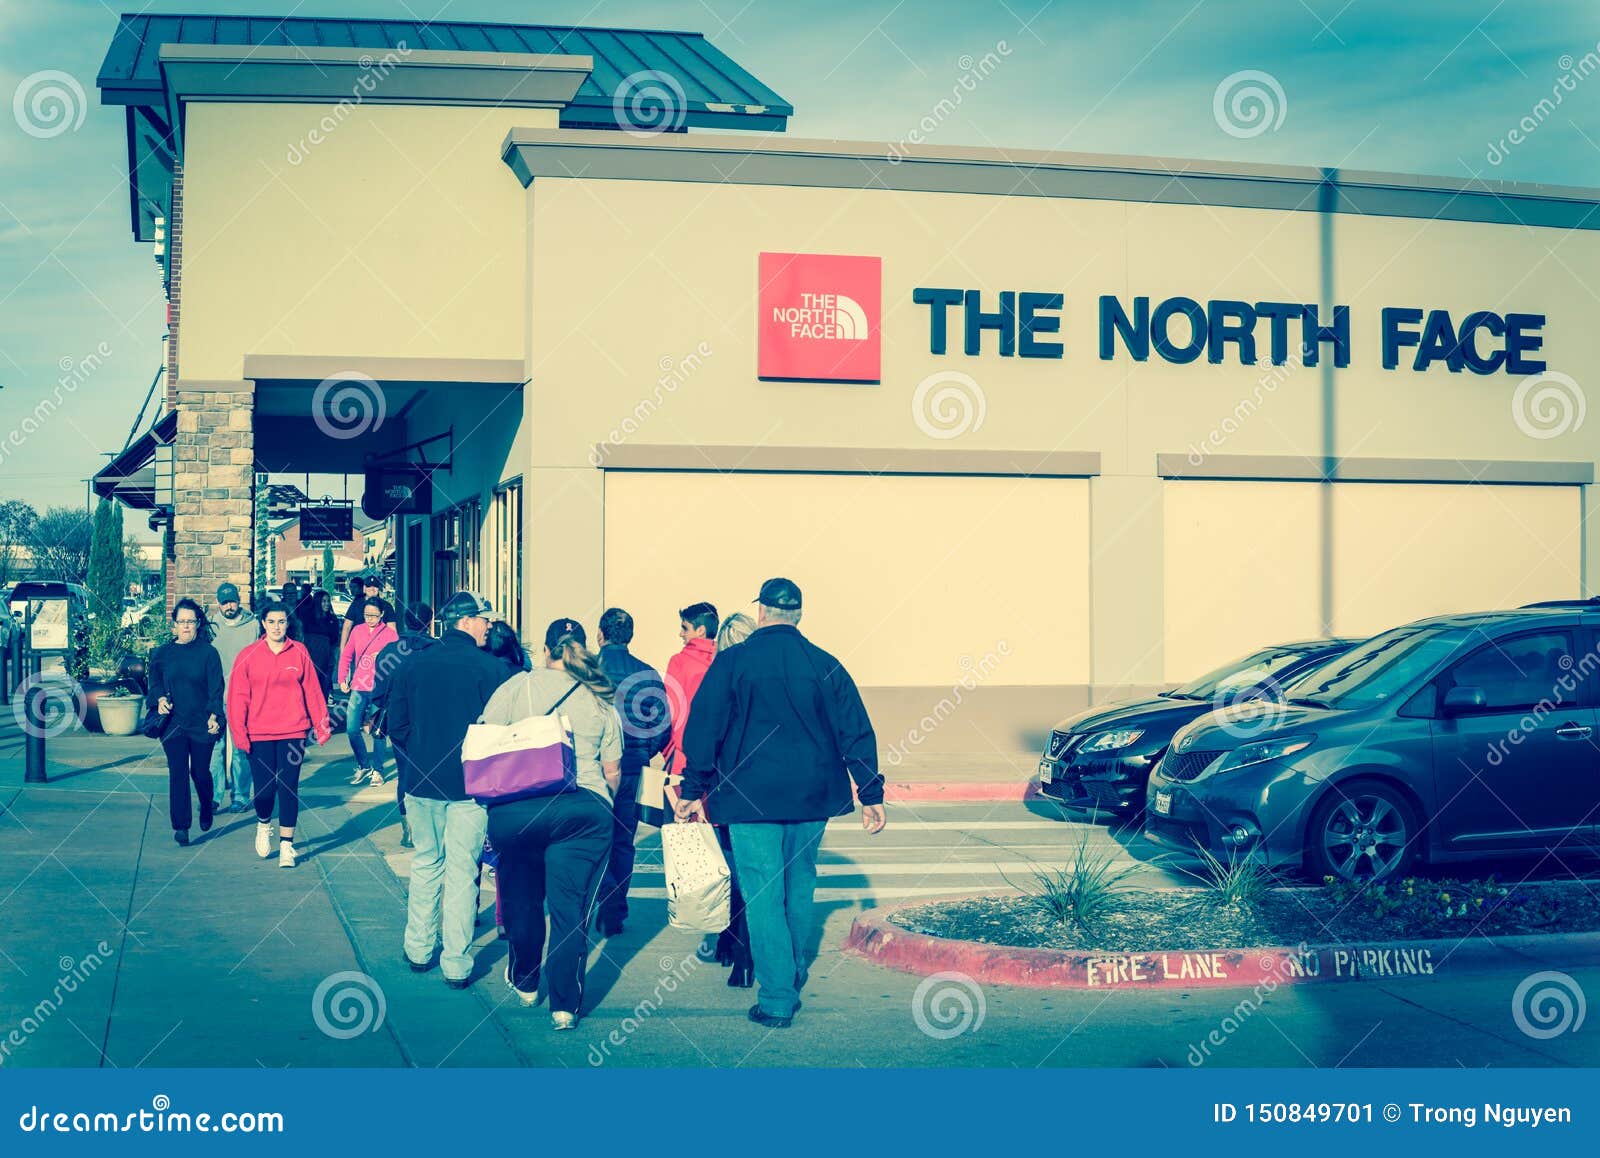 the north face us store